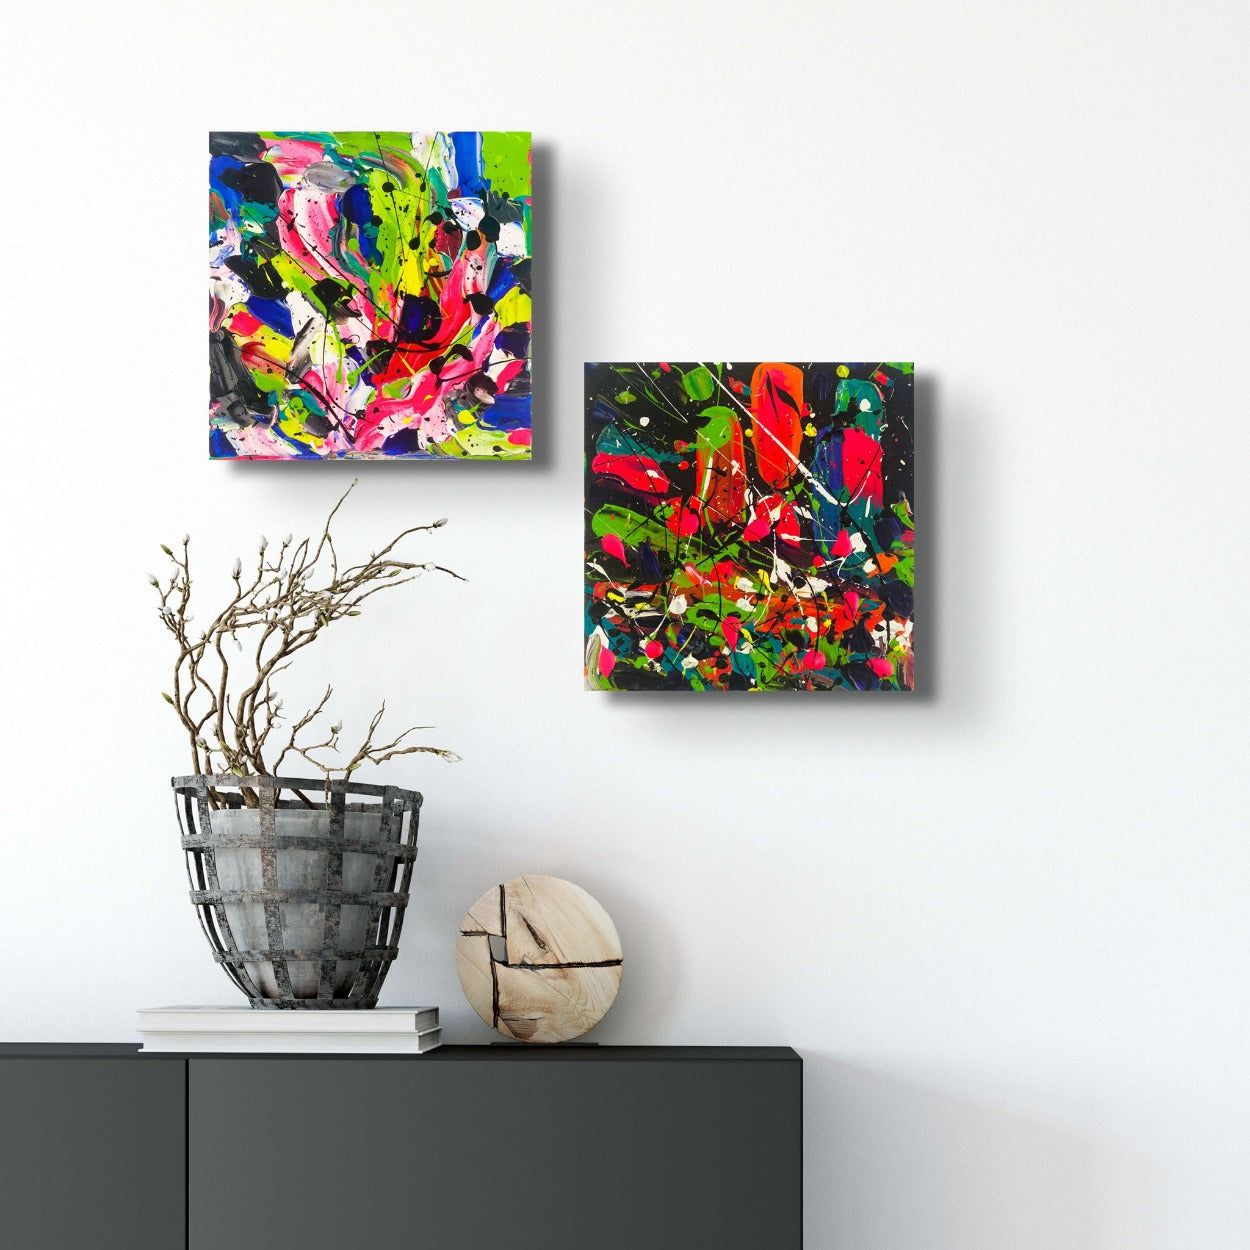 From left, 'City Days and 'City Nights' , brightly coloured abstracts of Hong Kong city. Original paintings on canvas by Bridget Bradley Abstract Artist.